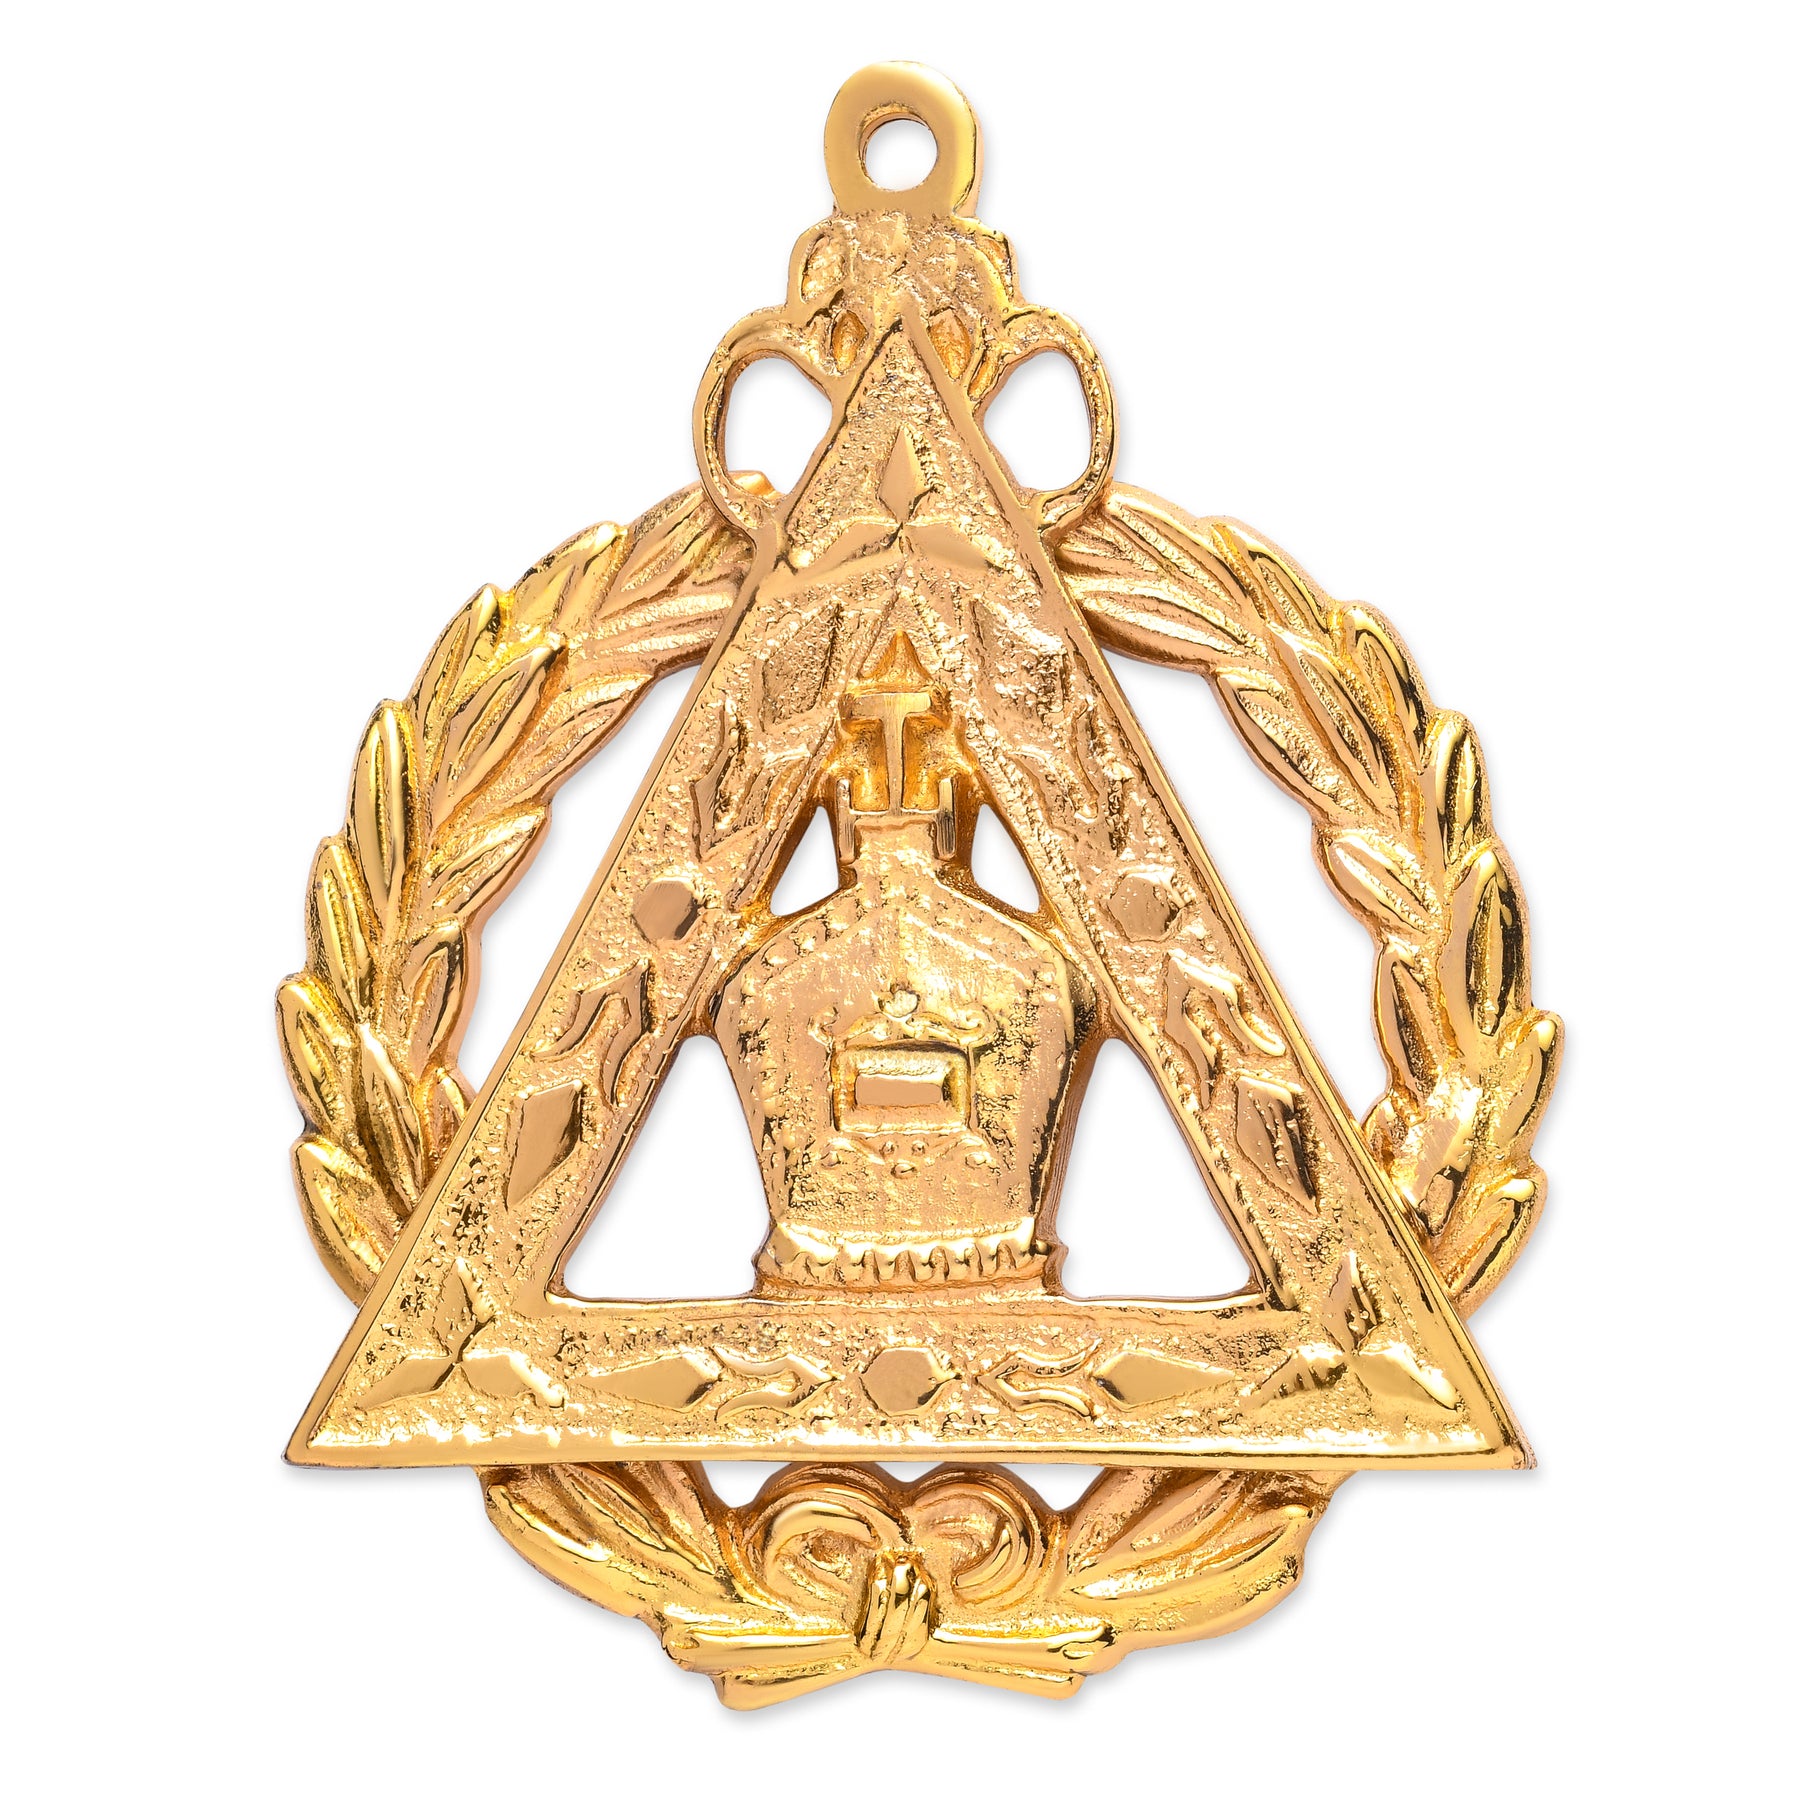 Grand Hight Priest Royal Arch Chapter Officer Collar Jewel - Gold Plated - Bricks Masons